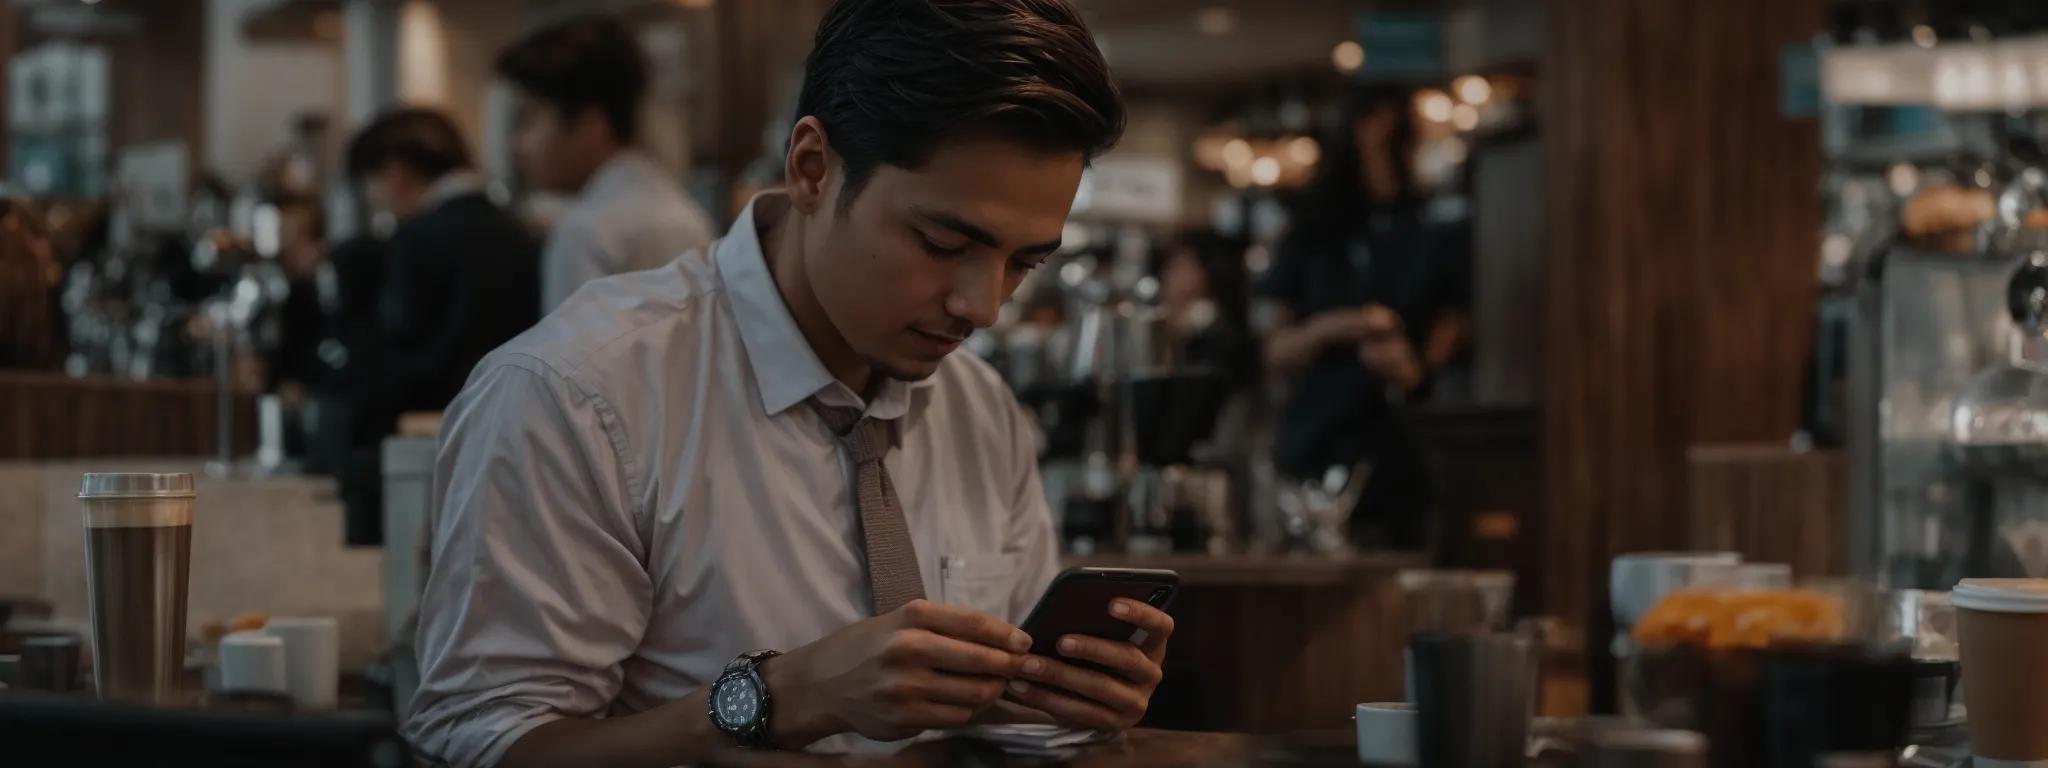 a busy professional checks an email on a smartphone amidst a bustling coffee shop.